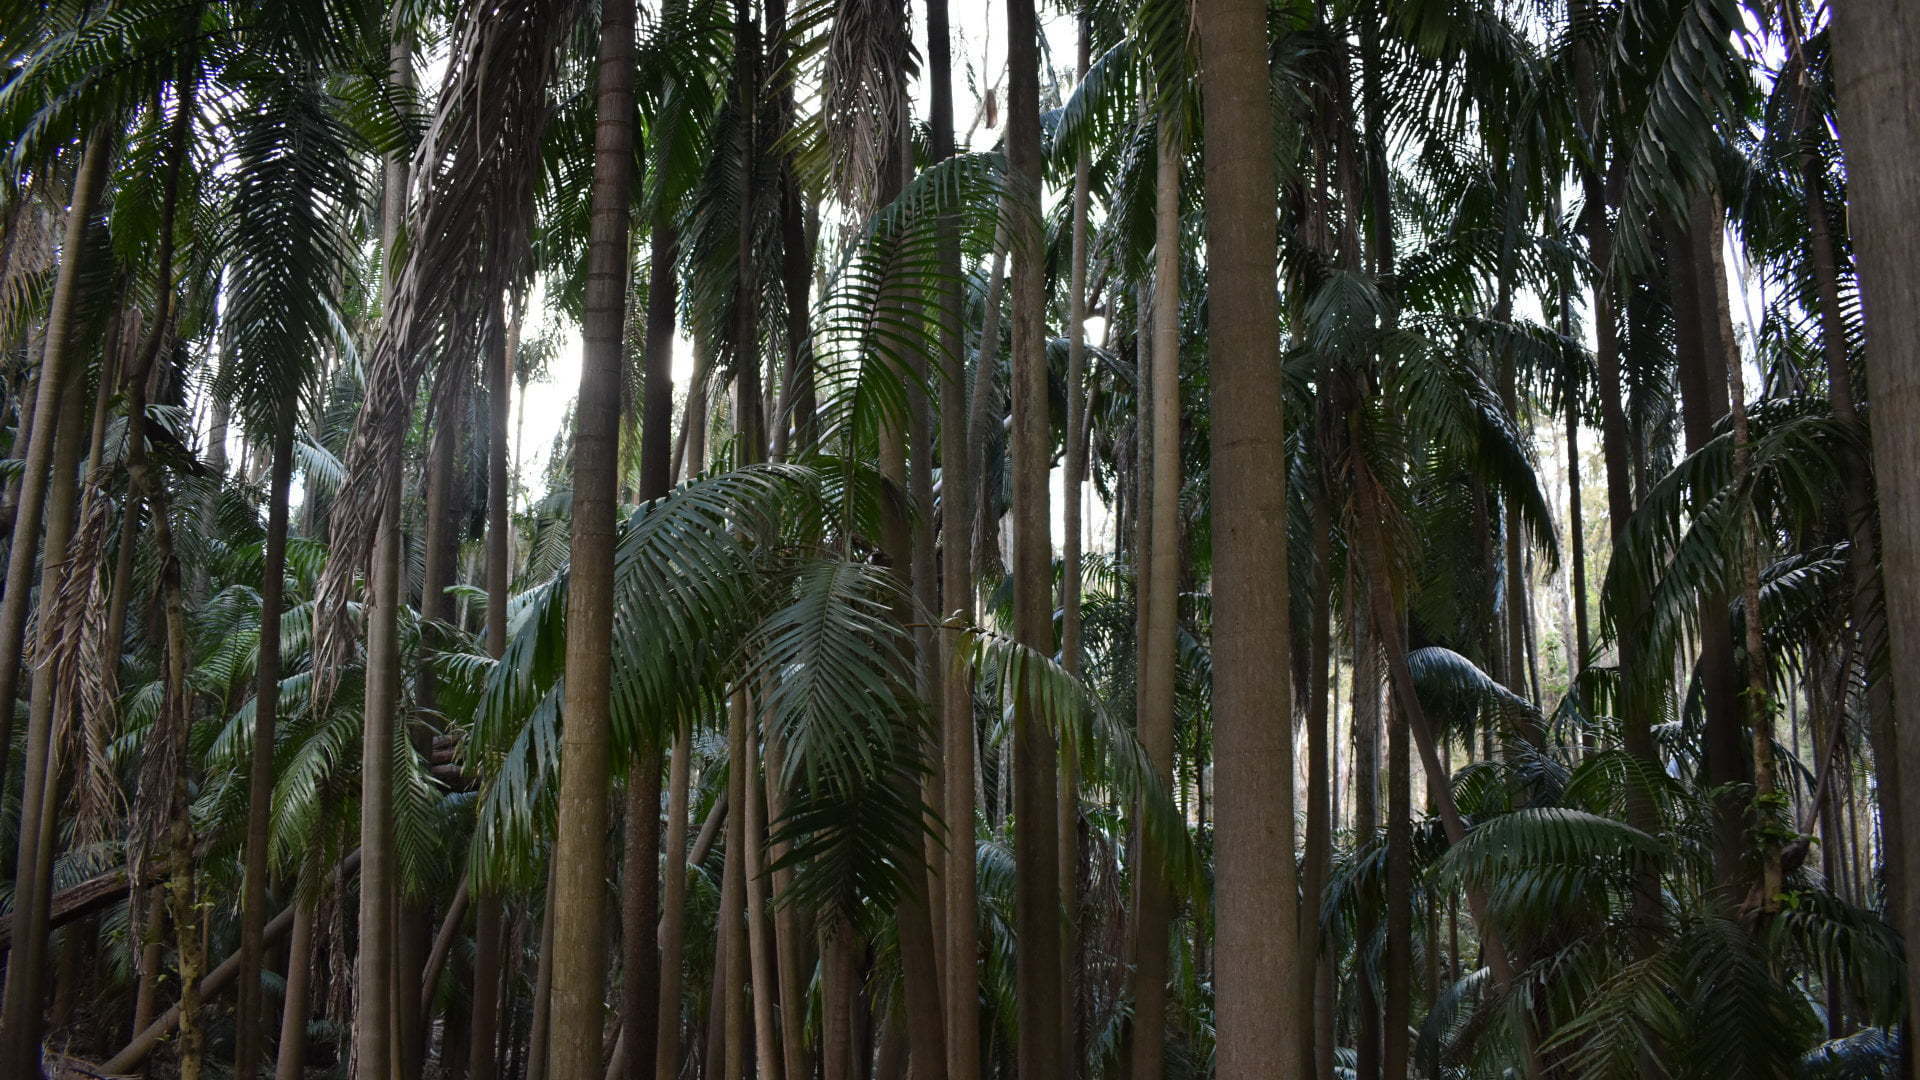 Dense palm trunks at The Palms National Park, a remnant of the palm subtropical rainforest, a spring fed gully with tall palms, bunya and hoop pines, eucalypt, and fig trees